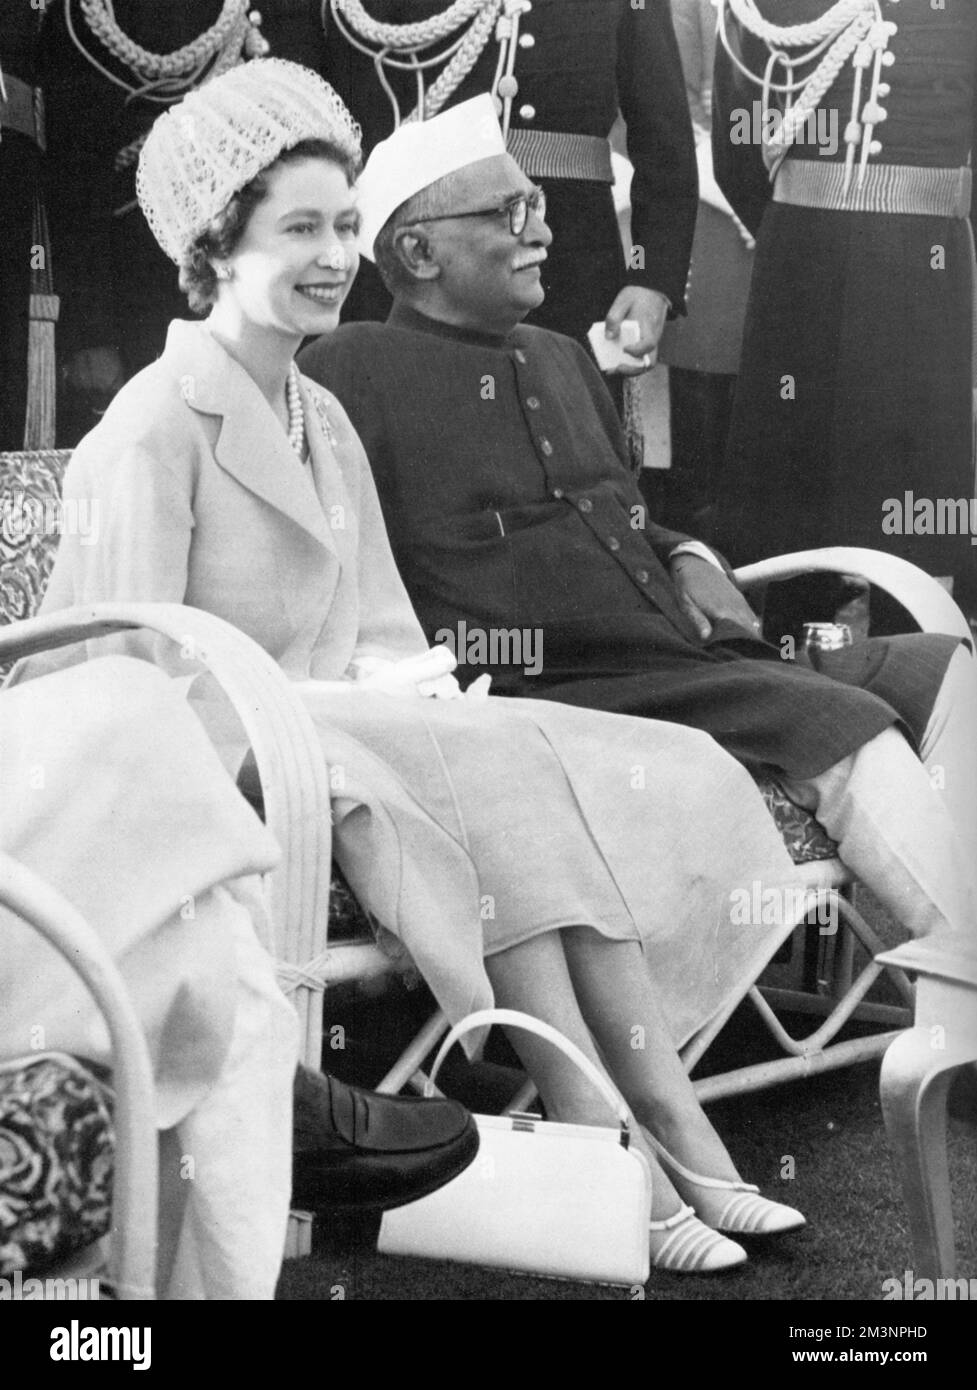 Queen Elizabeth II at a polo match with President Dr Rajendra Prasad in New Delhi during the royal tour of India in 1961.     Date: 1961 Stock Photo